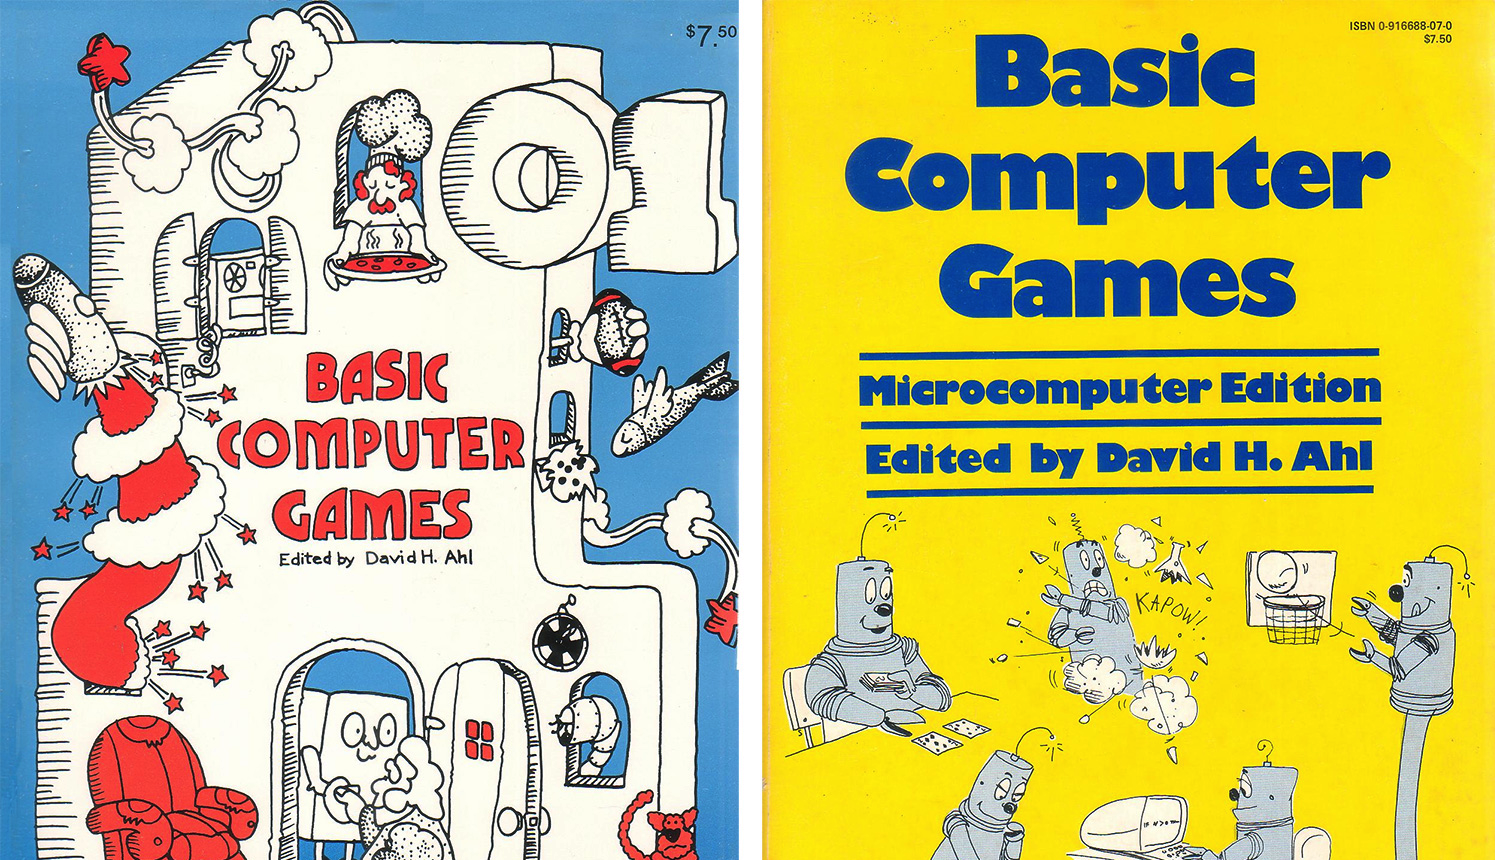 BASIC Computer Games book covers